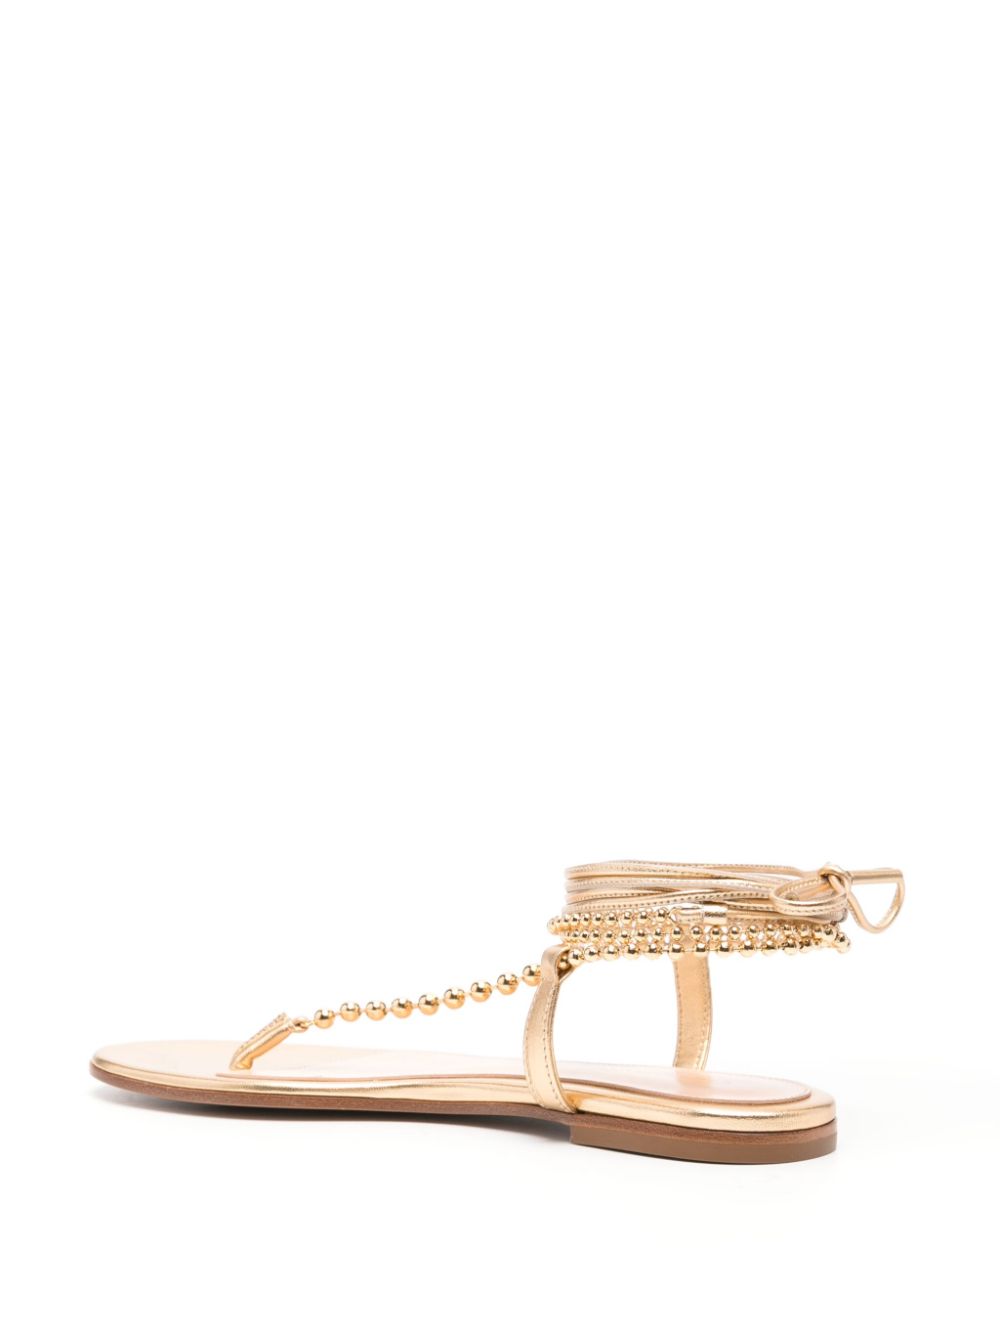 GIANVITO ROSSI Golden Leather Thong Sandals for Women with Metallic Bead Embellishment